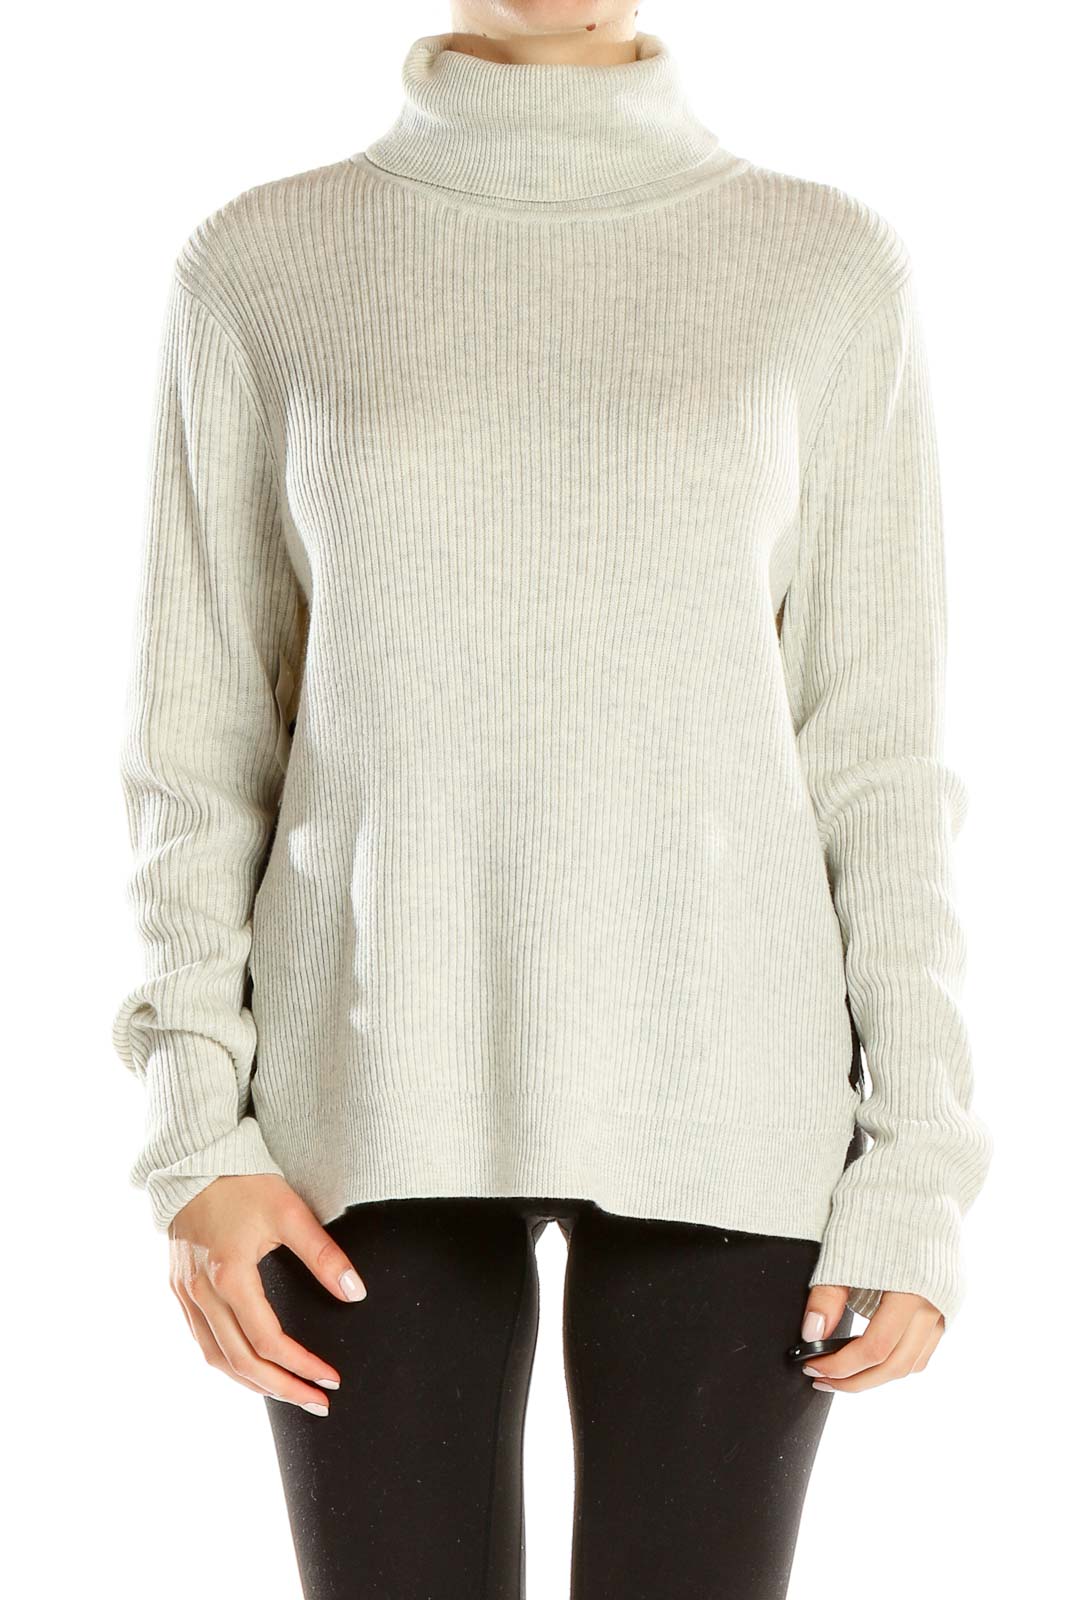 Gray All Day Wear Sweater Front